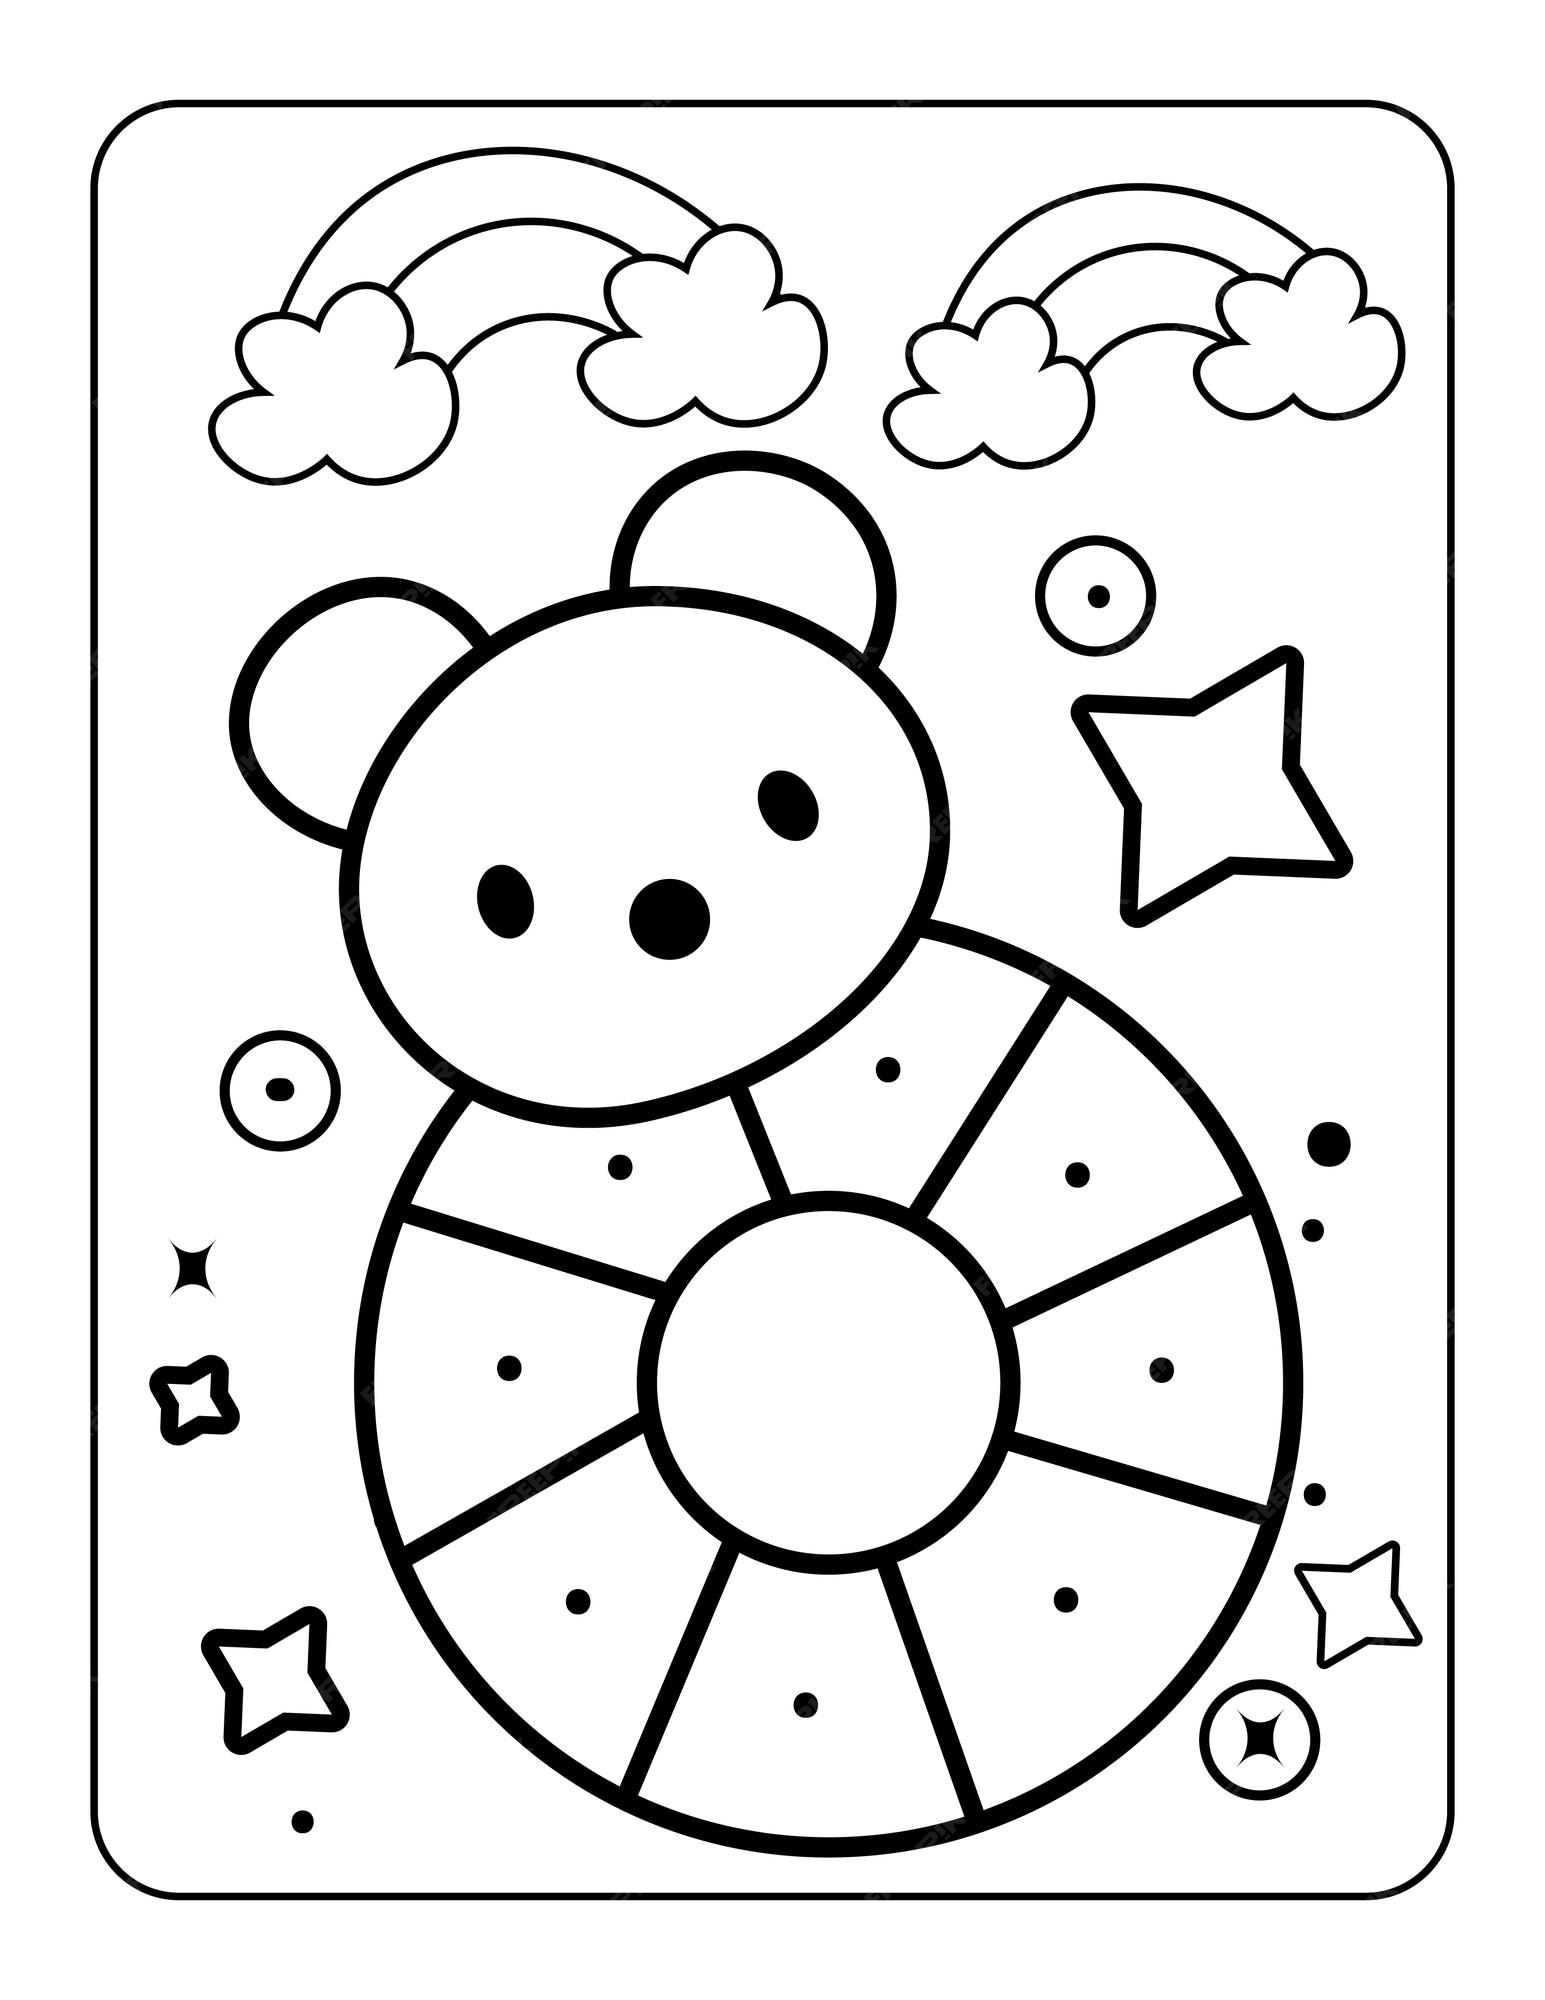 Premium vector baby toy coloring page easy illustration for coloring book